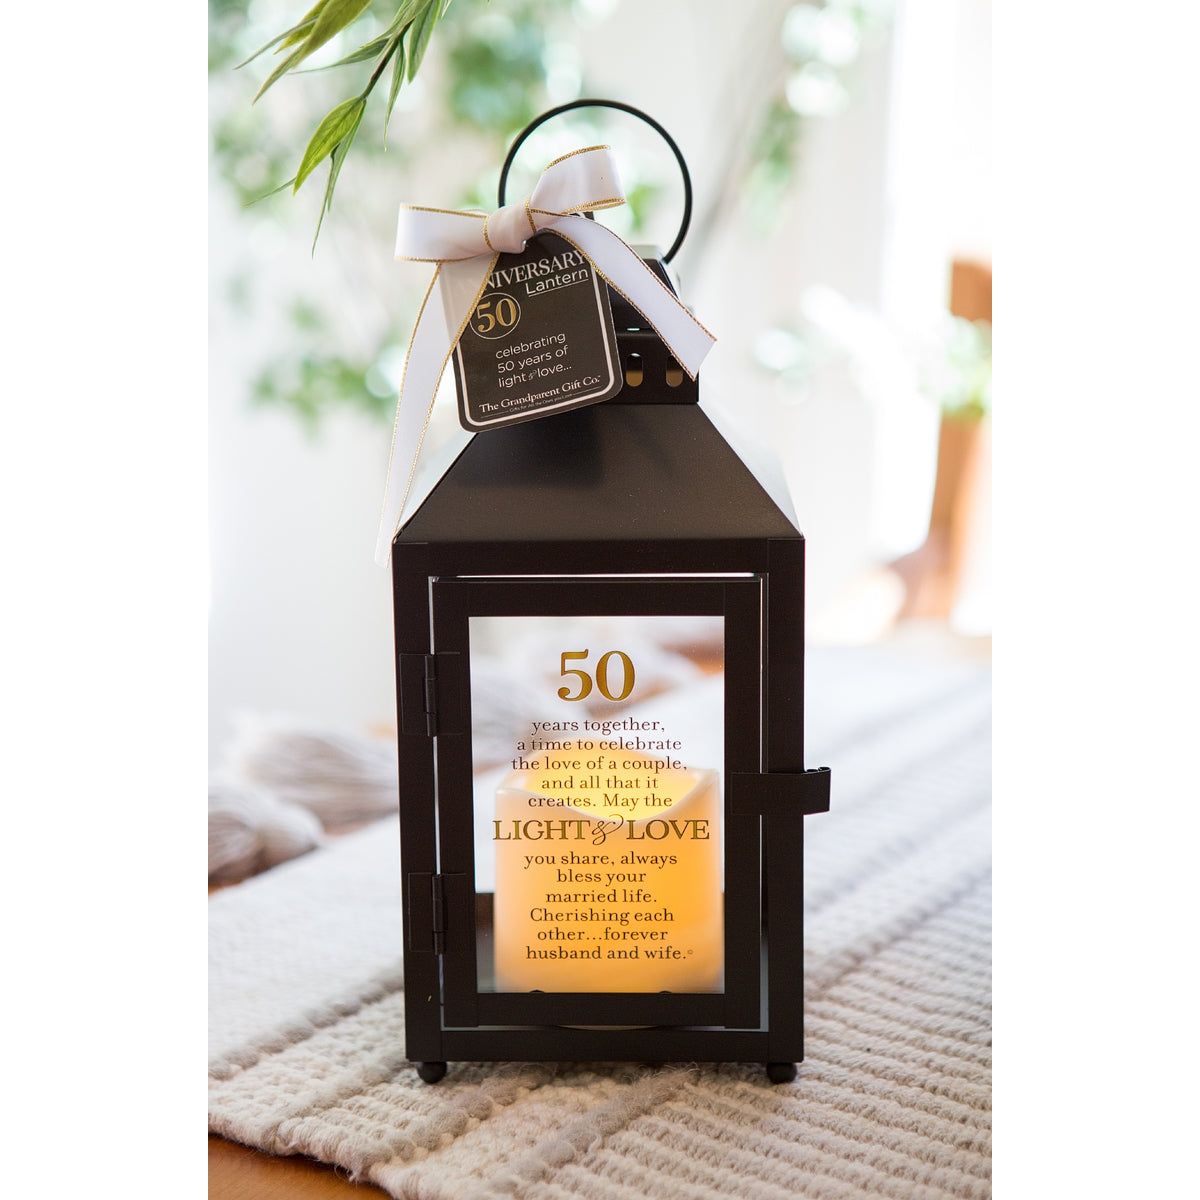 50th Anniversary Lantern with candle lit with a soft glow